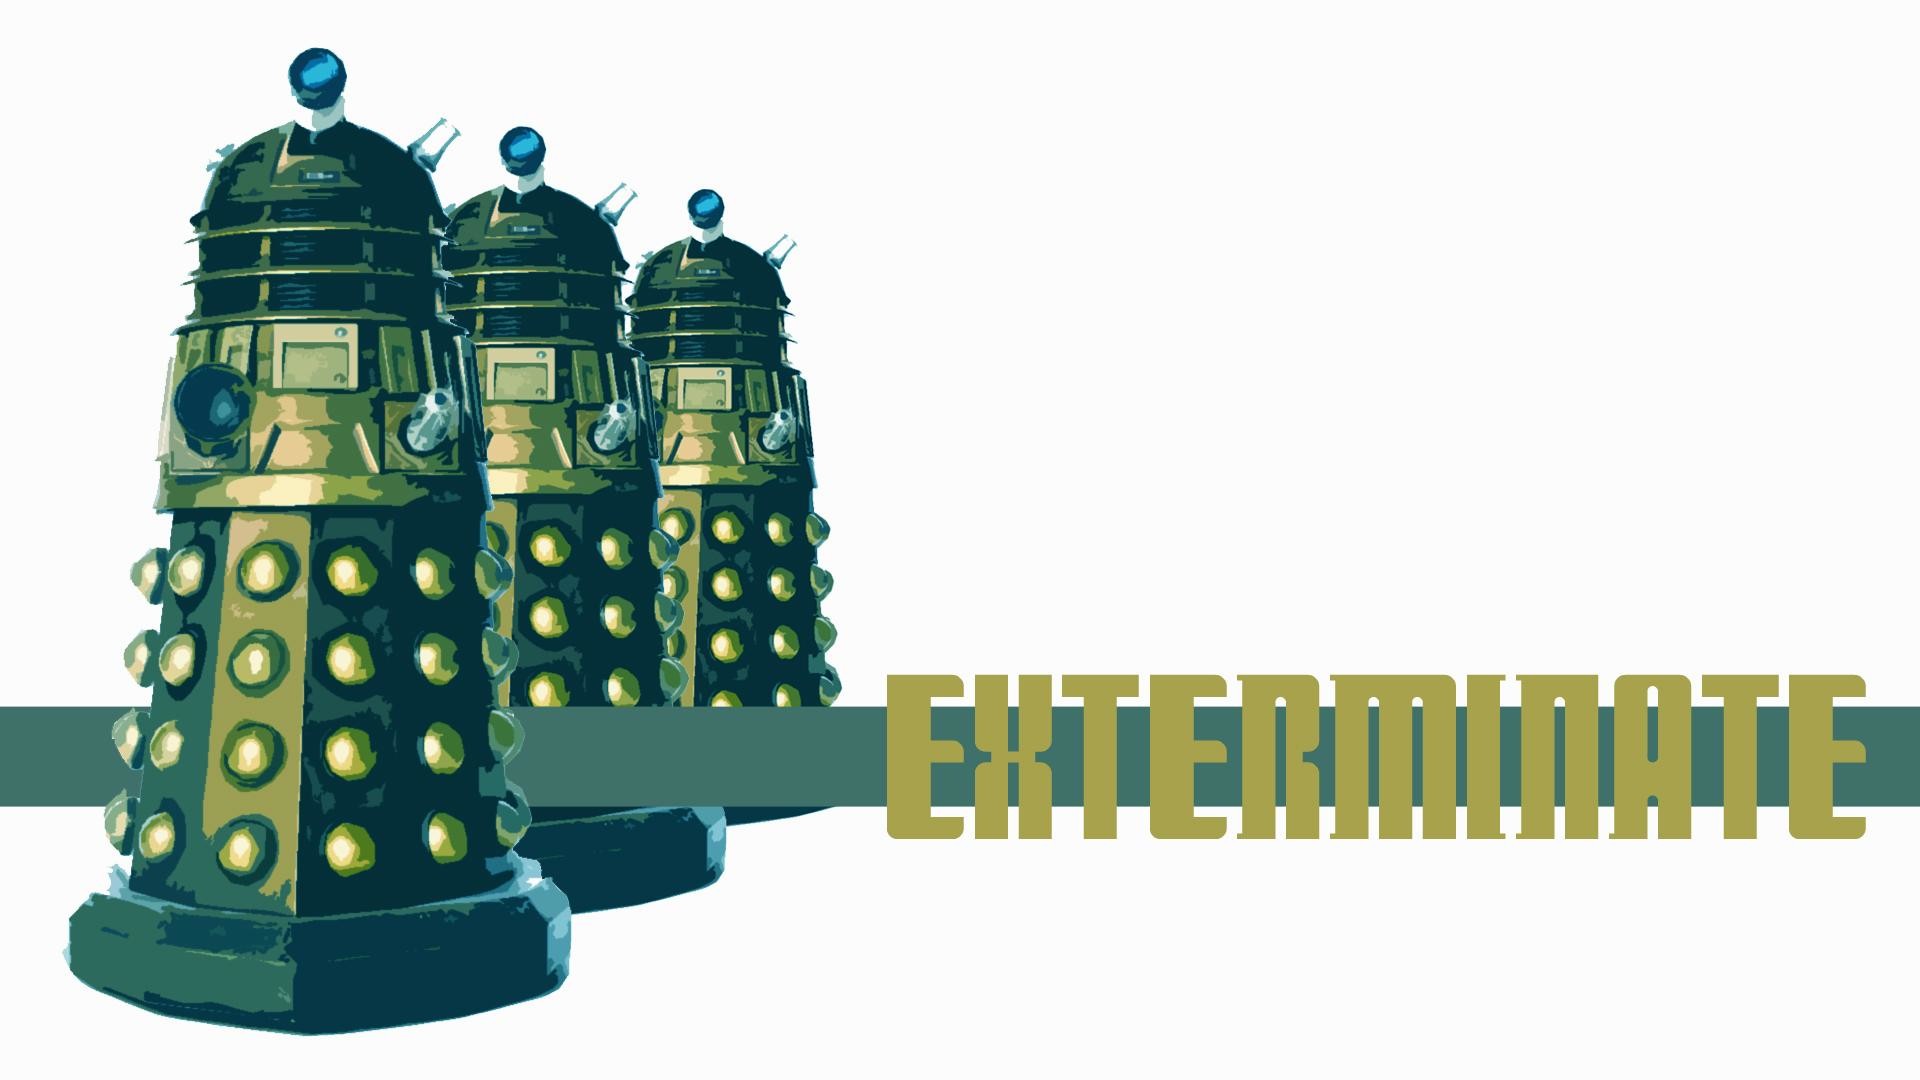 Doctor who 1920C3971080 wallpaper wp2001305